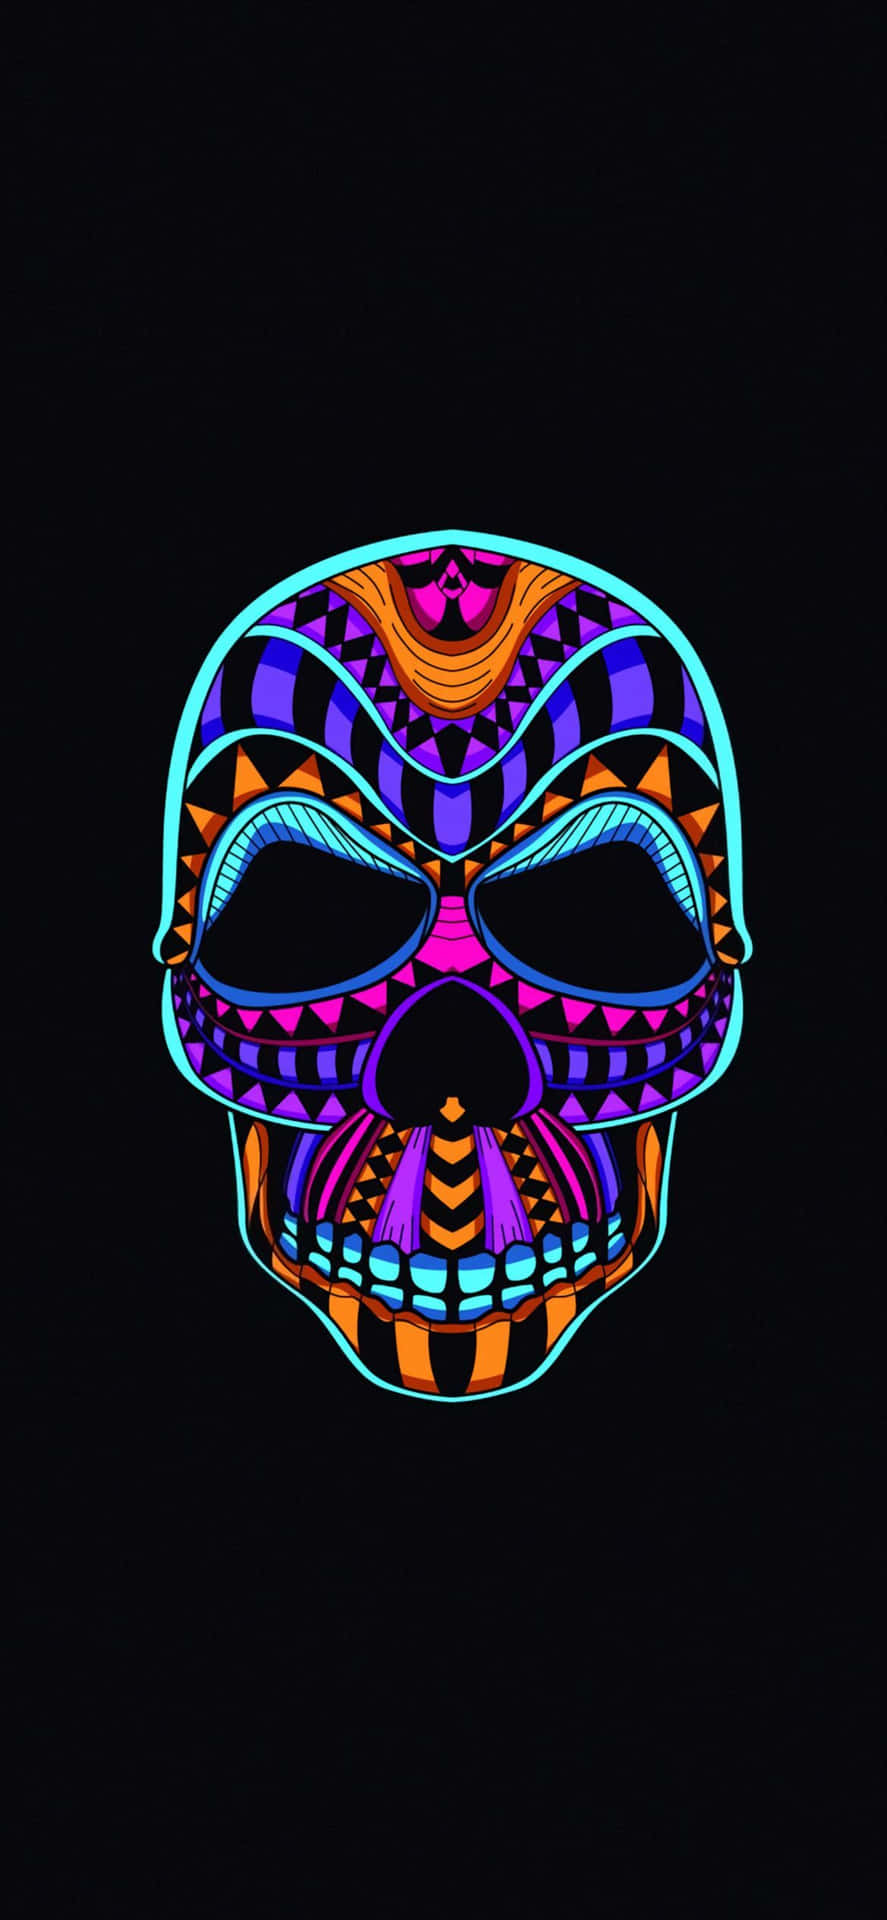 High-quality Colorful Skull Wallpaper